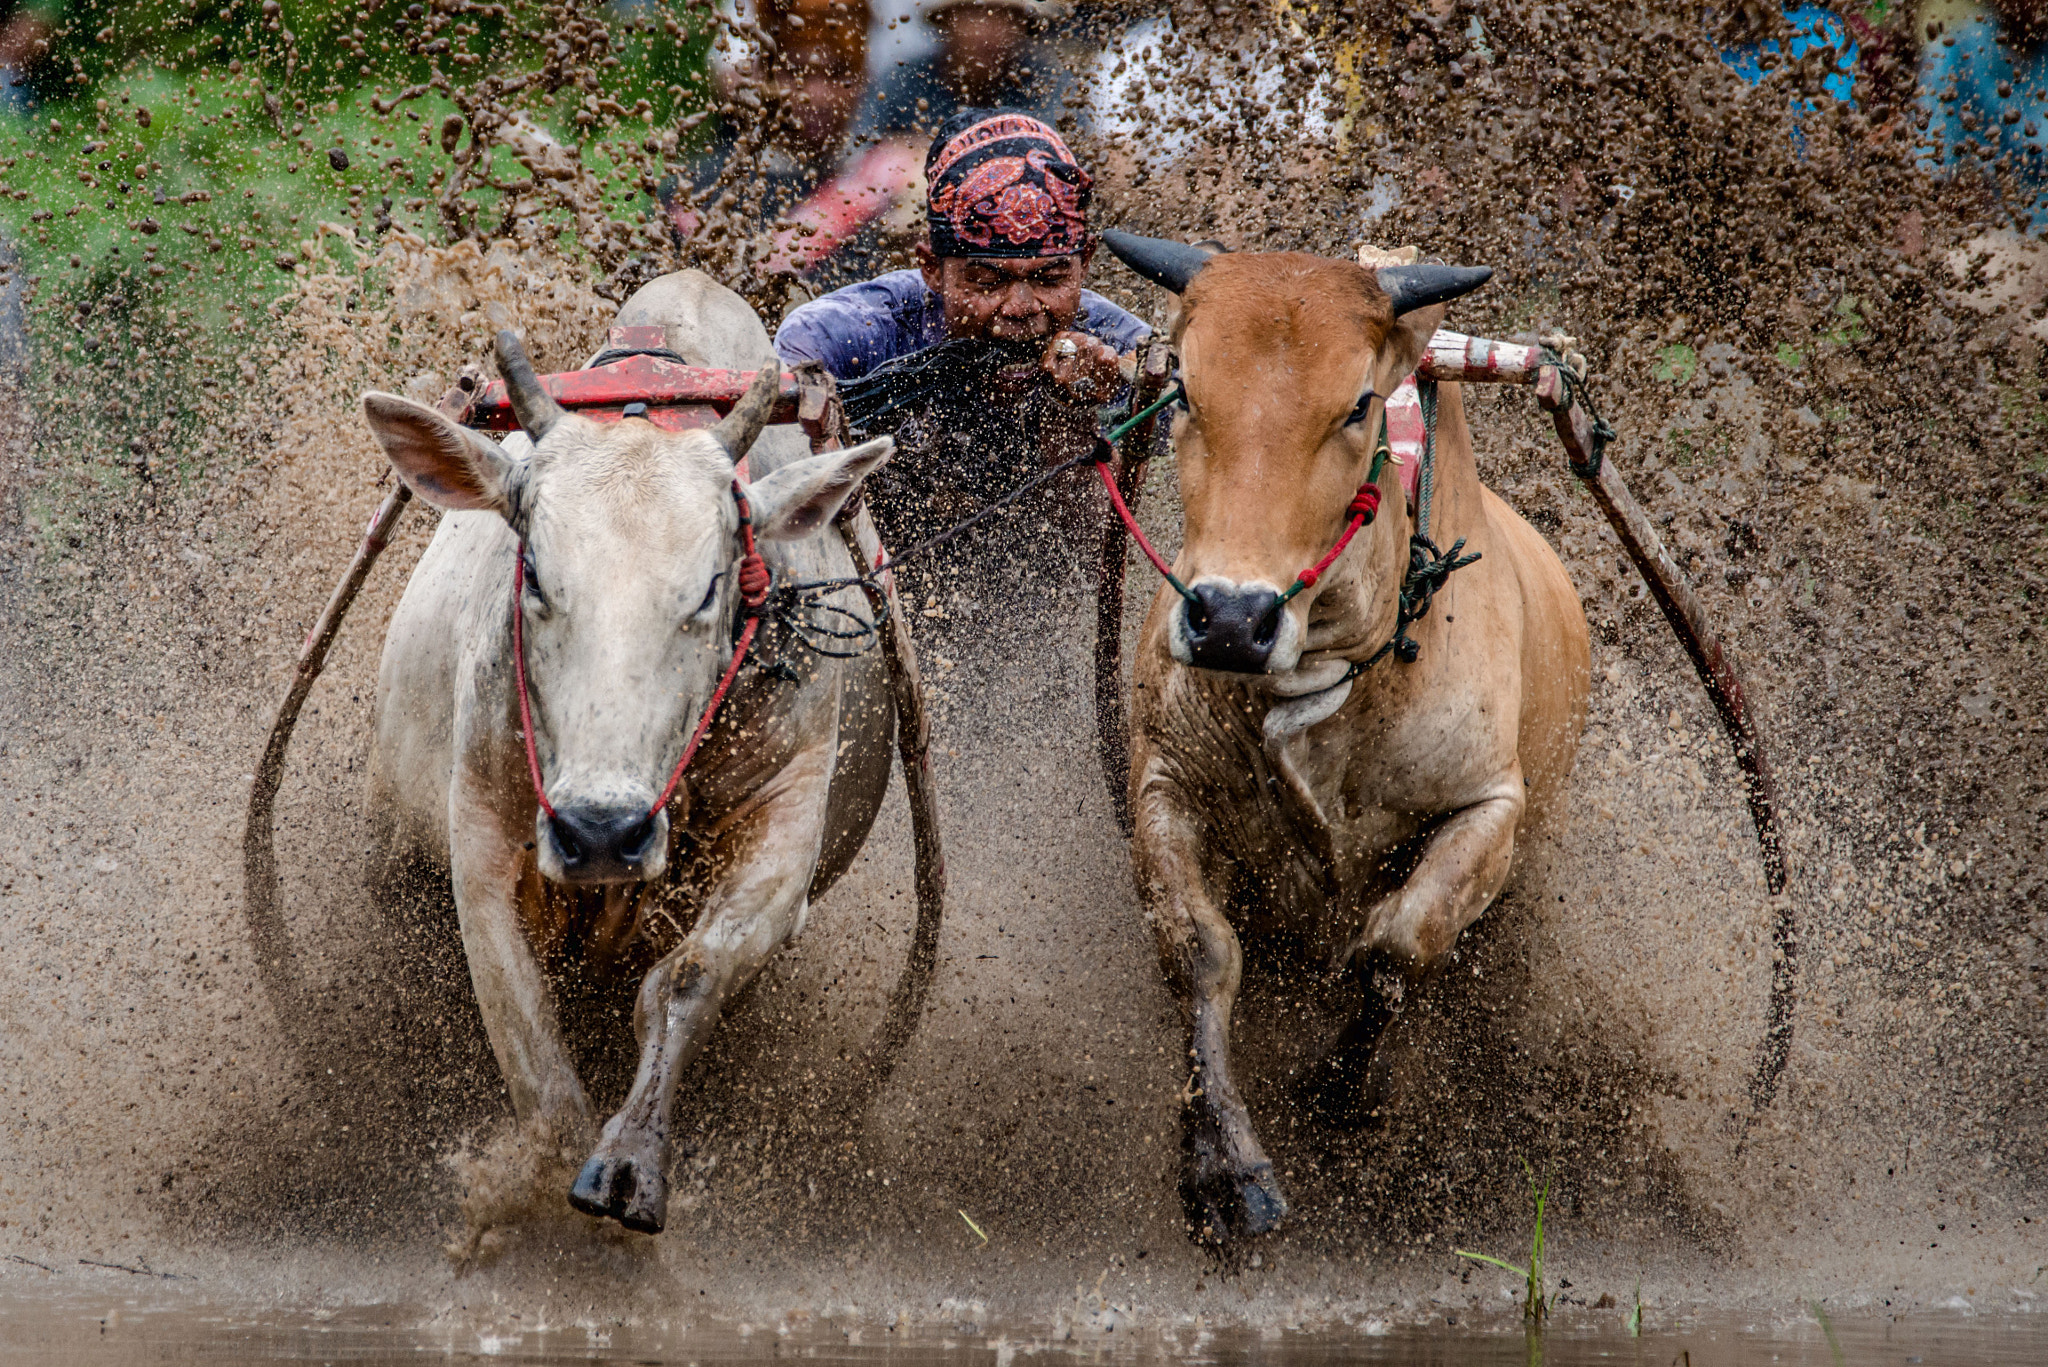 Nikon D800 sample photo. A jockey races a pair of bulls at the pacu jawi event in western sumatra. photography